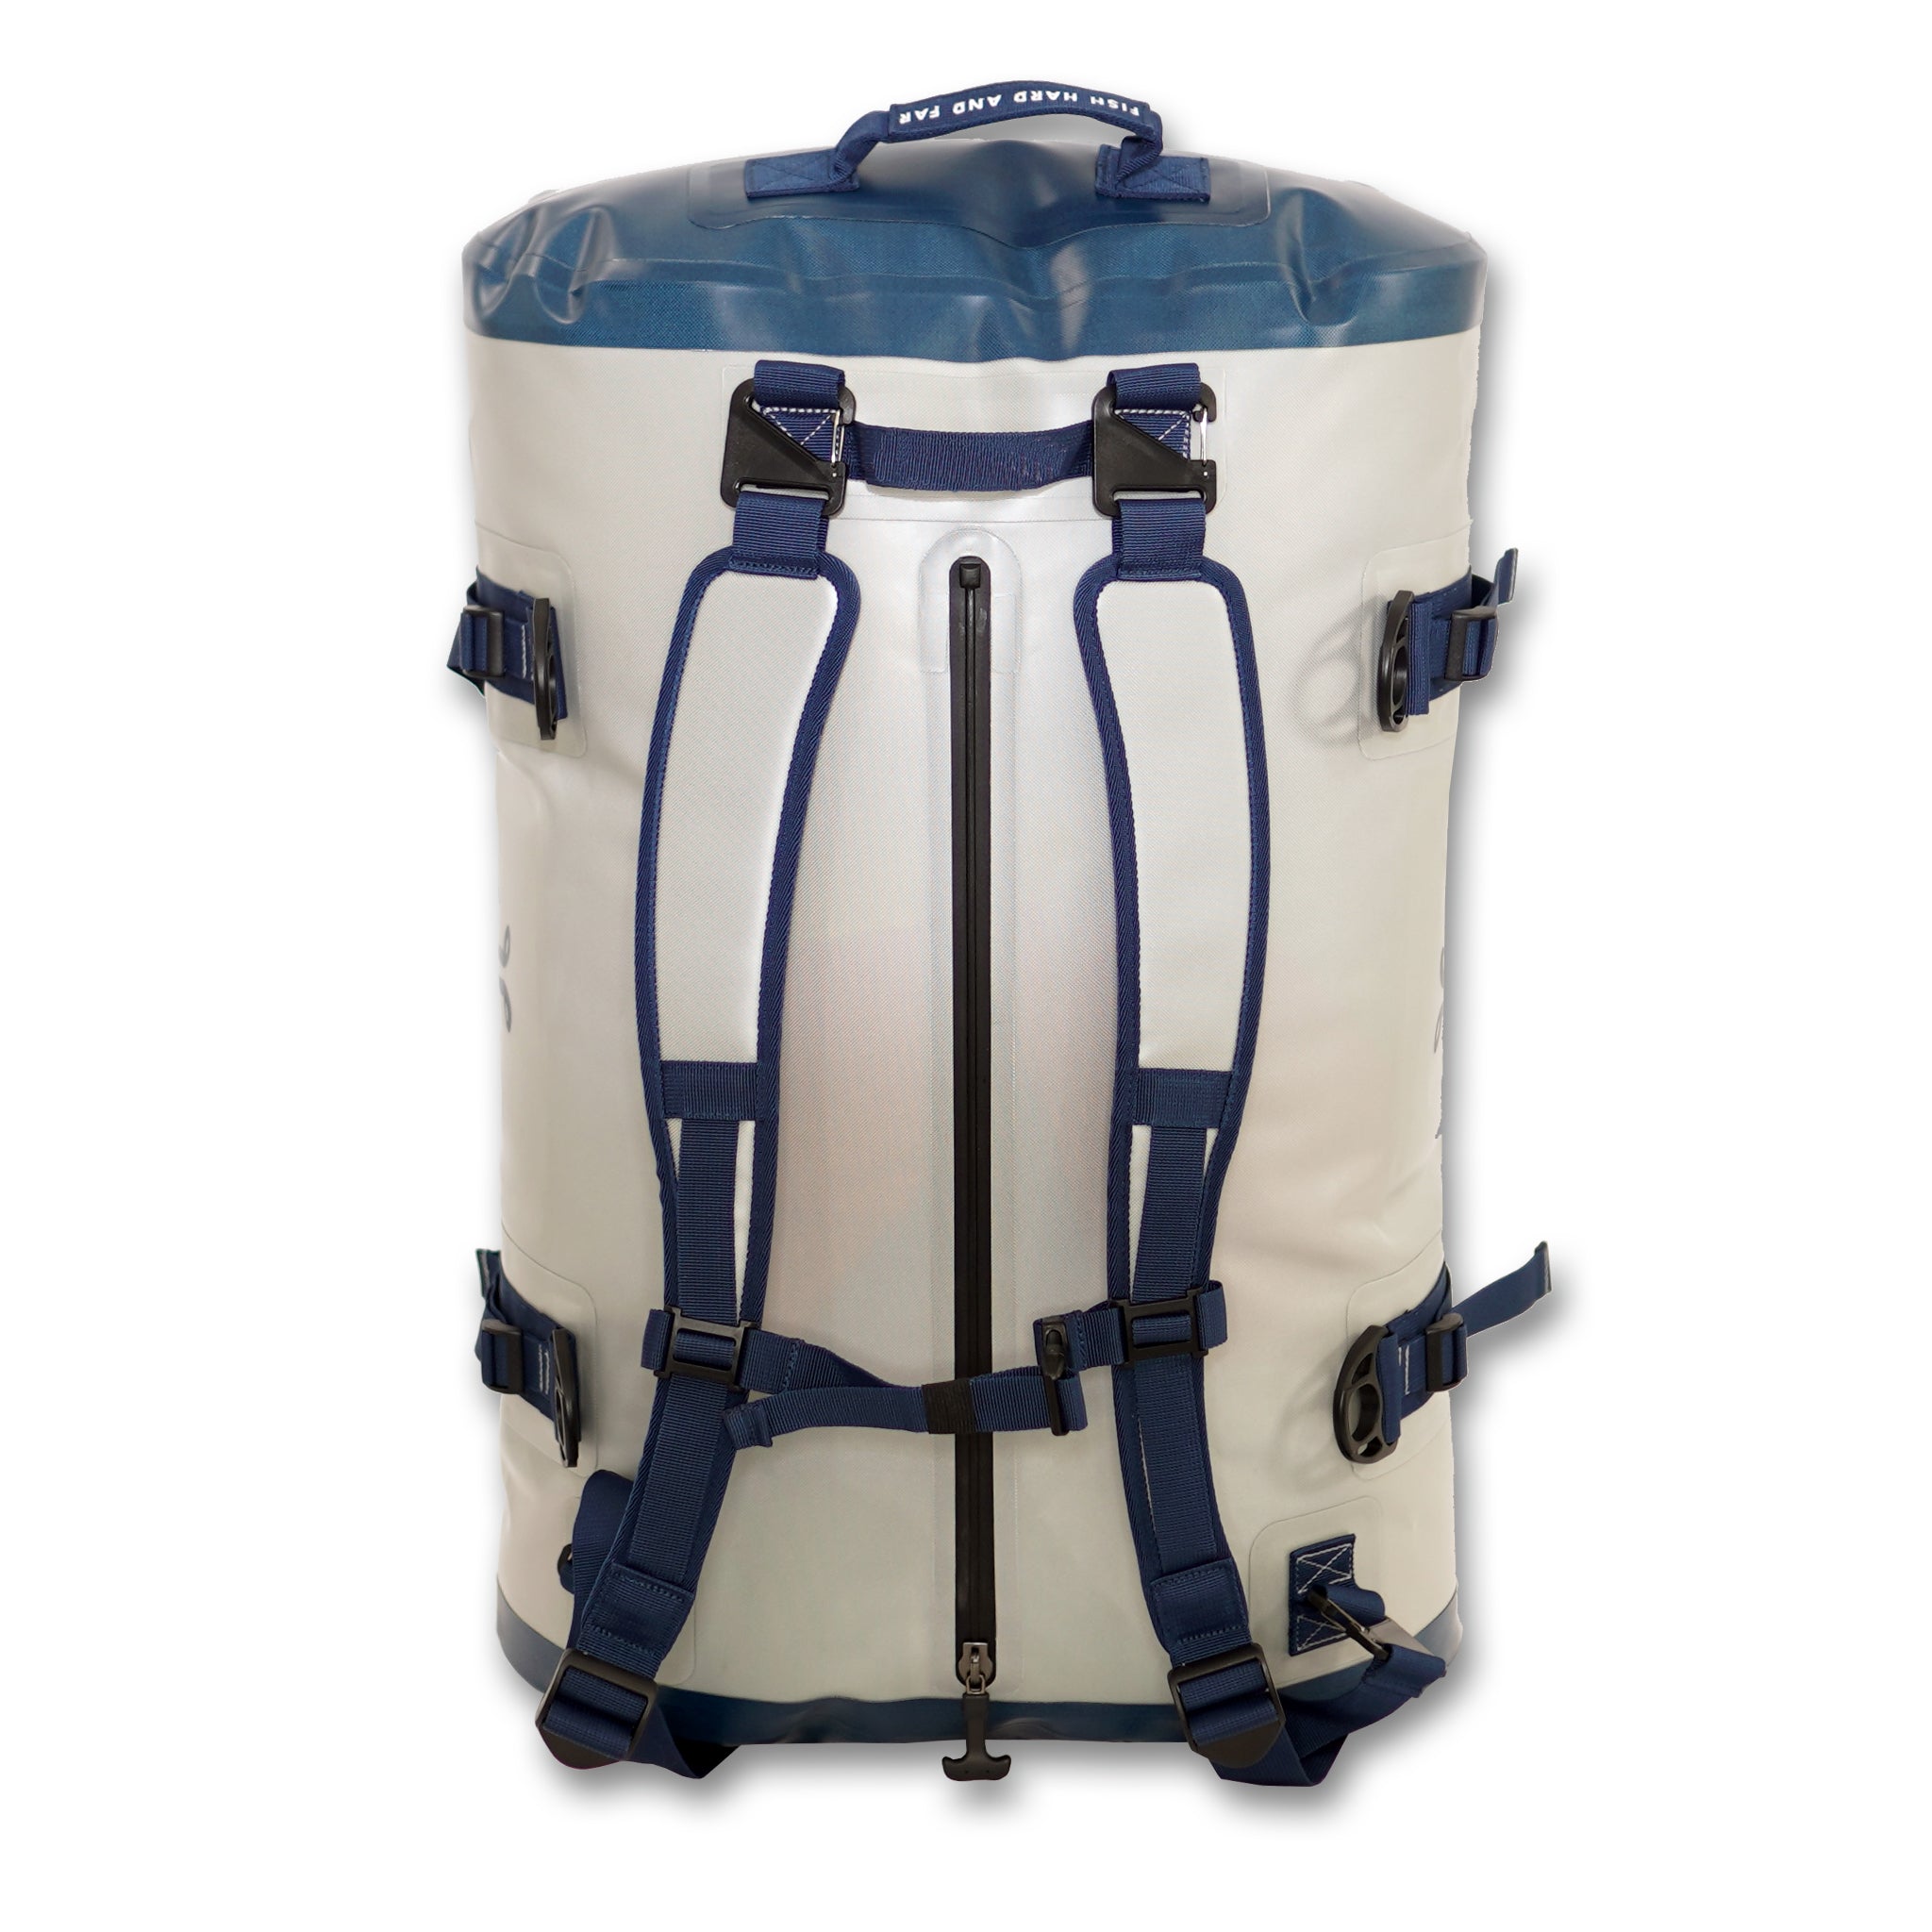 3-Day Dry Duffle Bag – Deckhand Sports